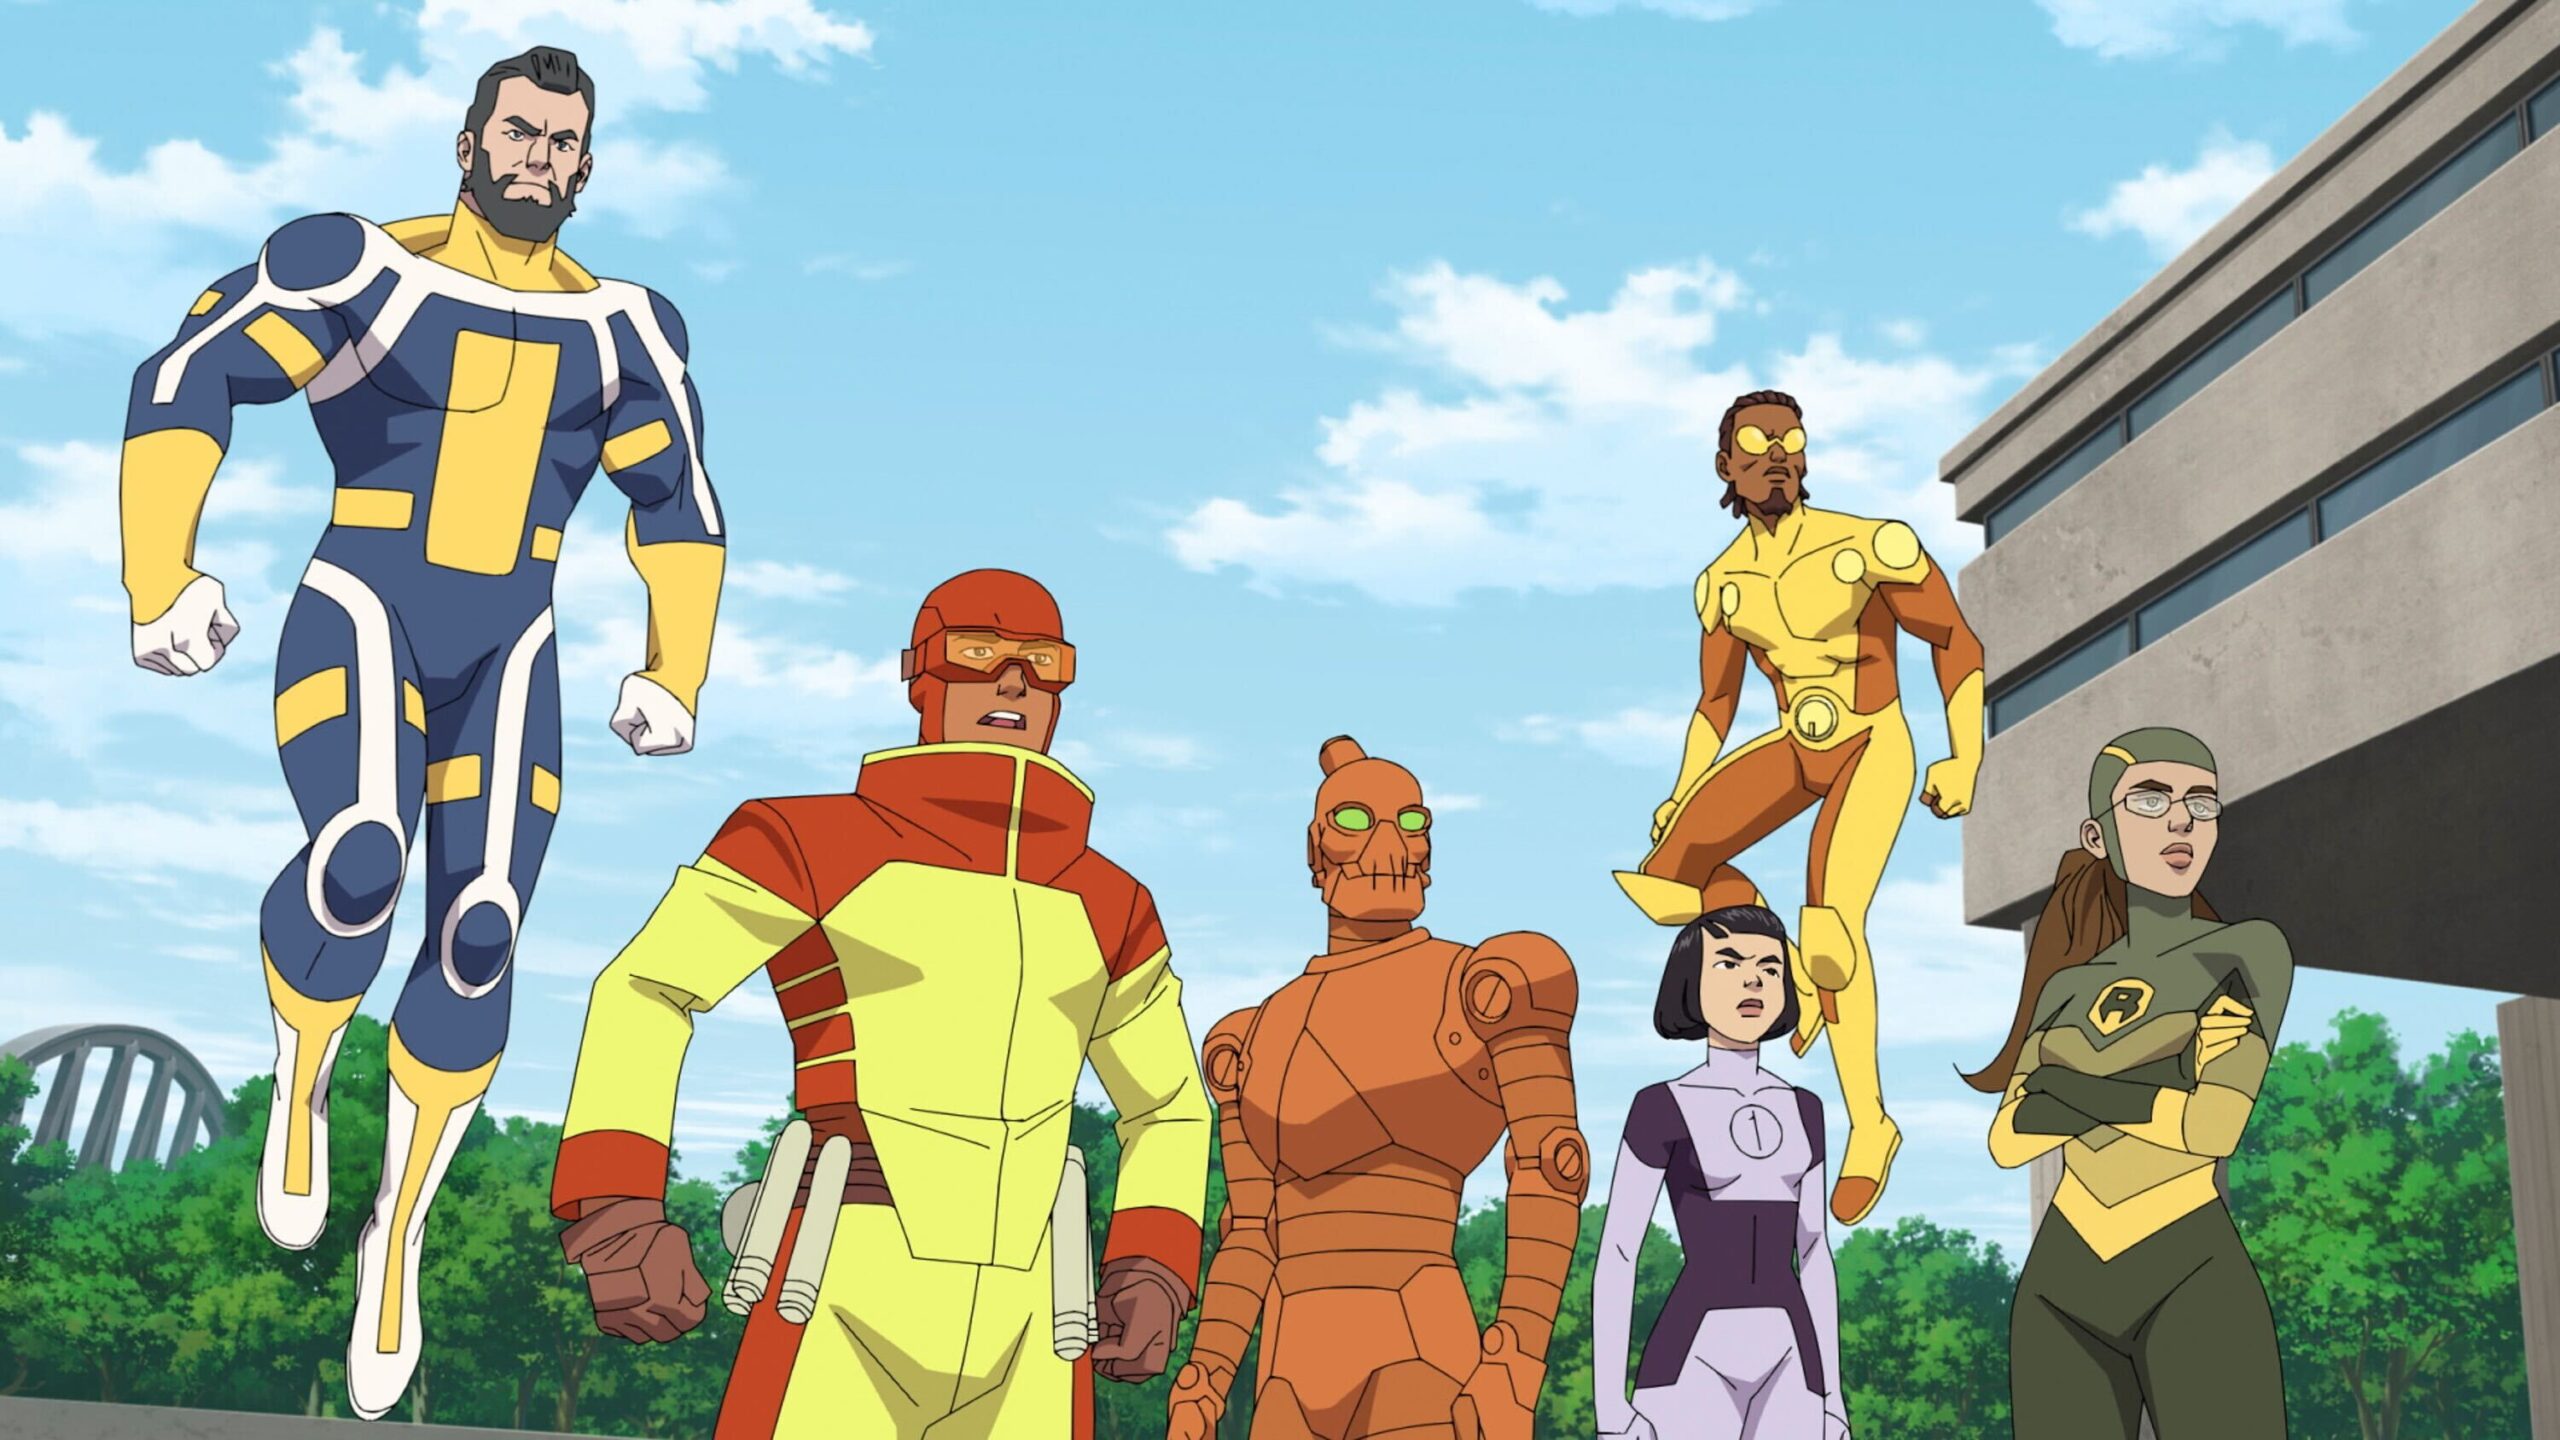 Ross Marquand as The Immortal, Jay Pharoah as Bulletproof, Jason Mantzoukas as Rex Splode, , Zachary Quinto as Robot, Melise as Katherine "Kate" Cha/ Dupli-Kate, and Grey DeLisle as Shrinking Rae in Robert Kirkman's Invincible Season 2 Episode 2